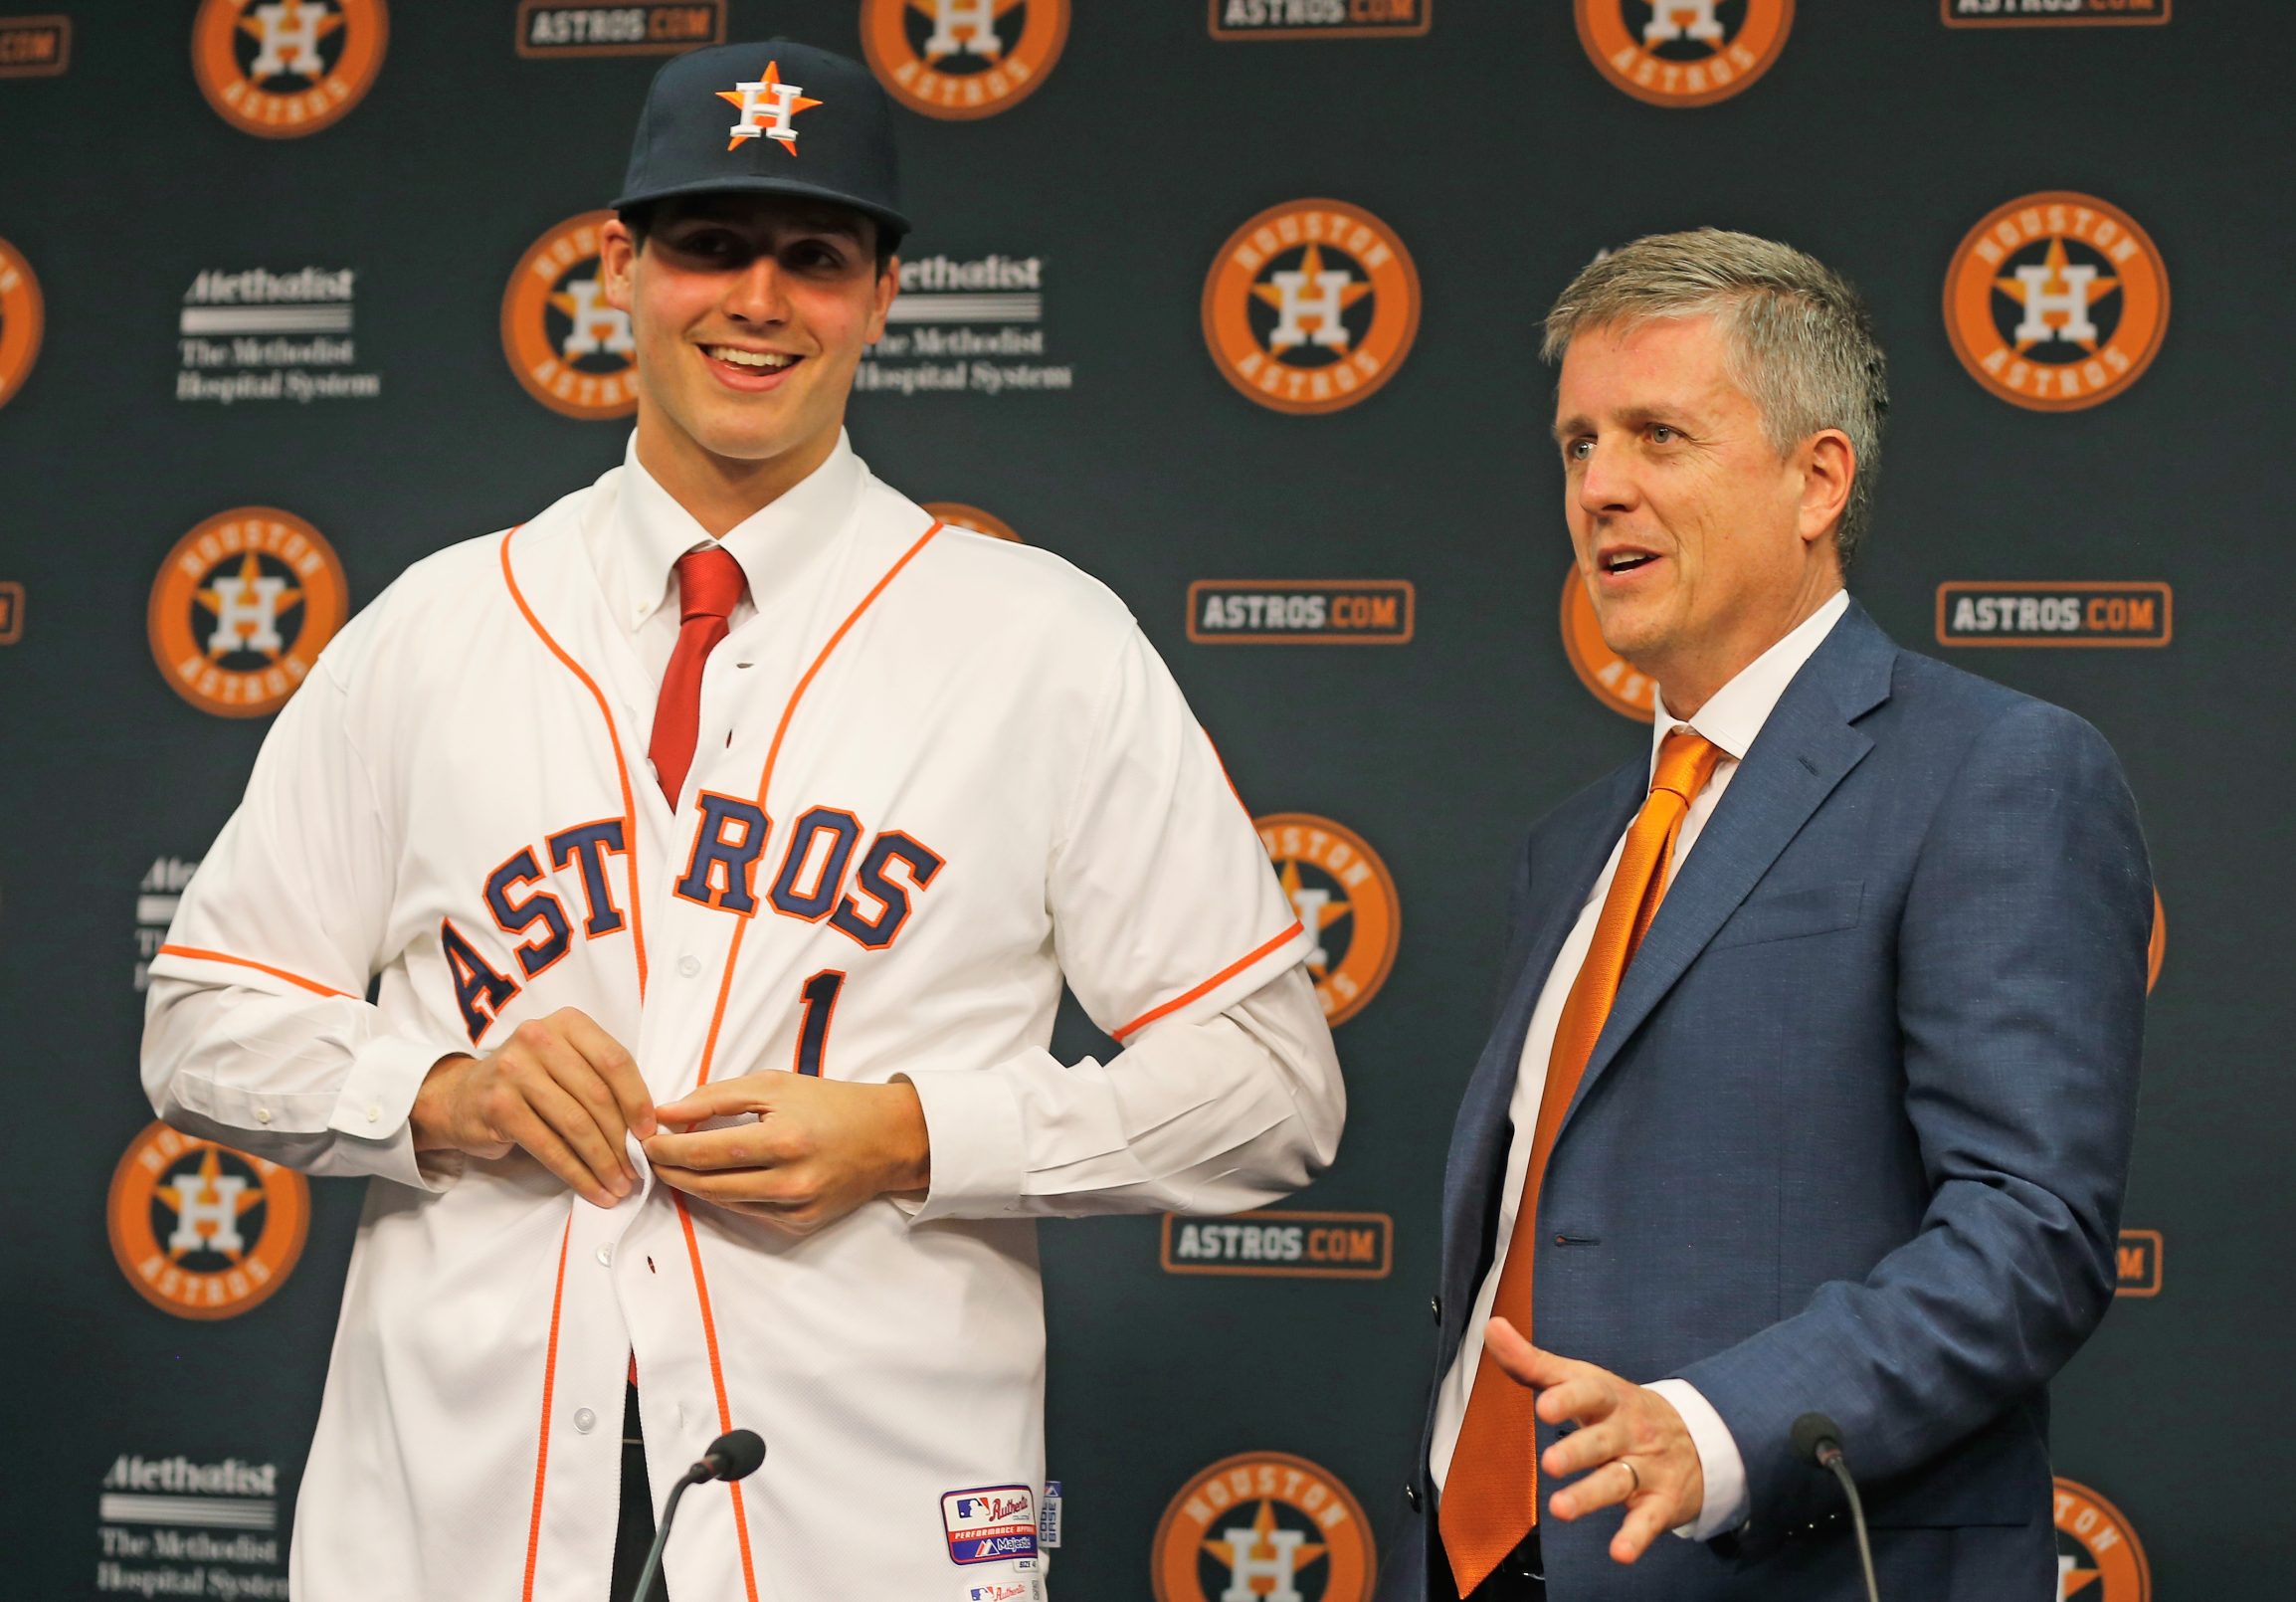 Jeff Luhnow introduces Mark Appel to the media